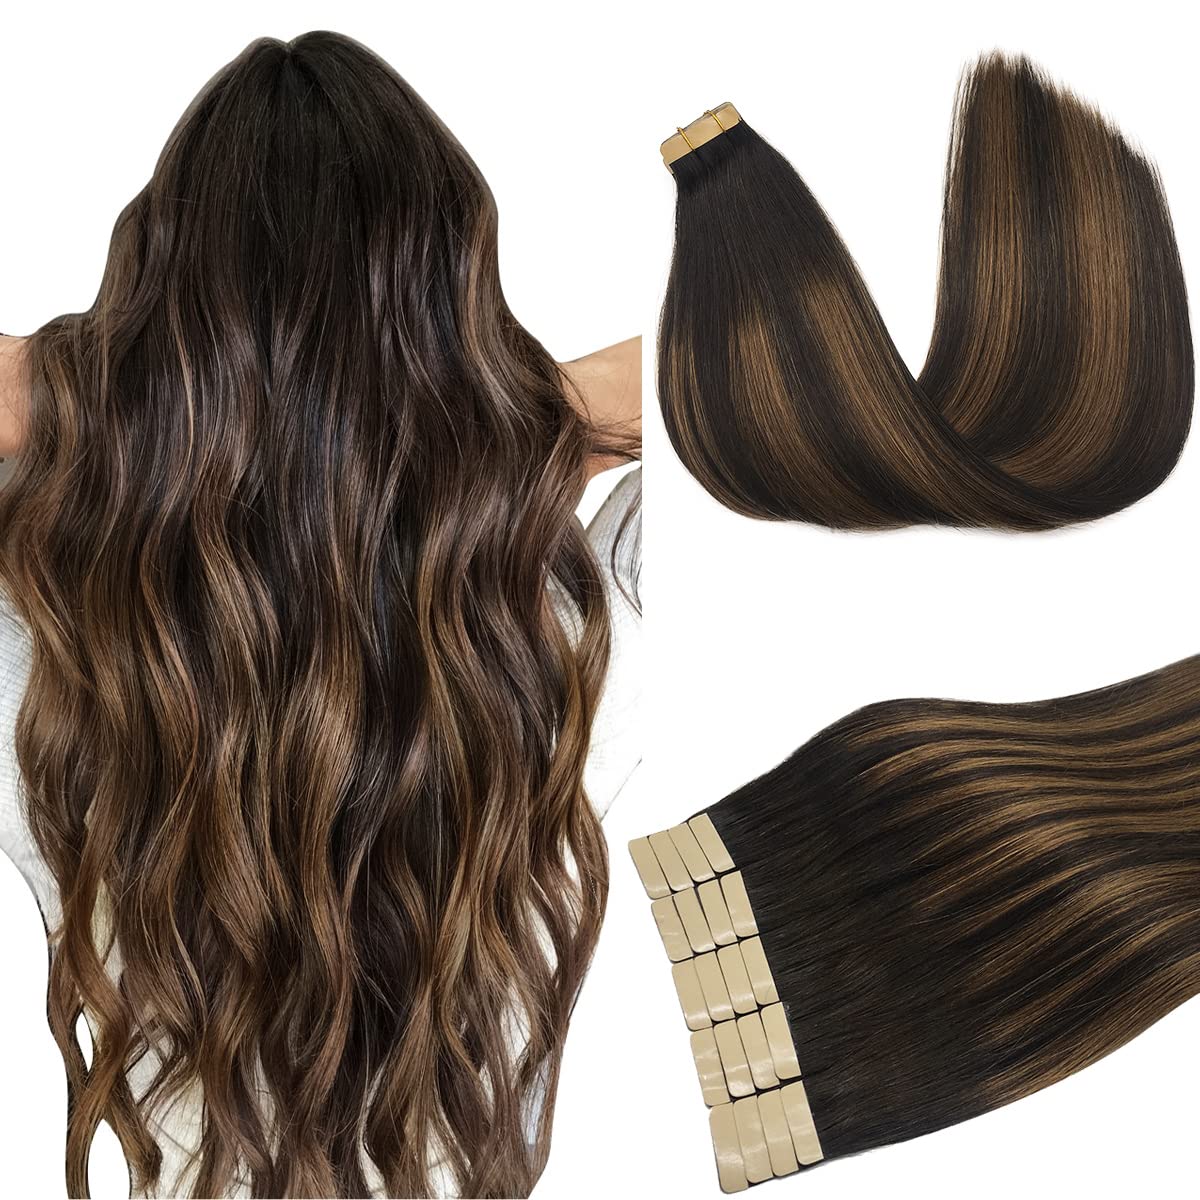 DOORES 50g 20pcs Tape in Human Hair Extensions [...]